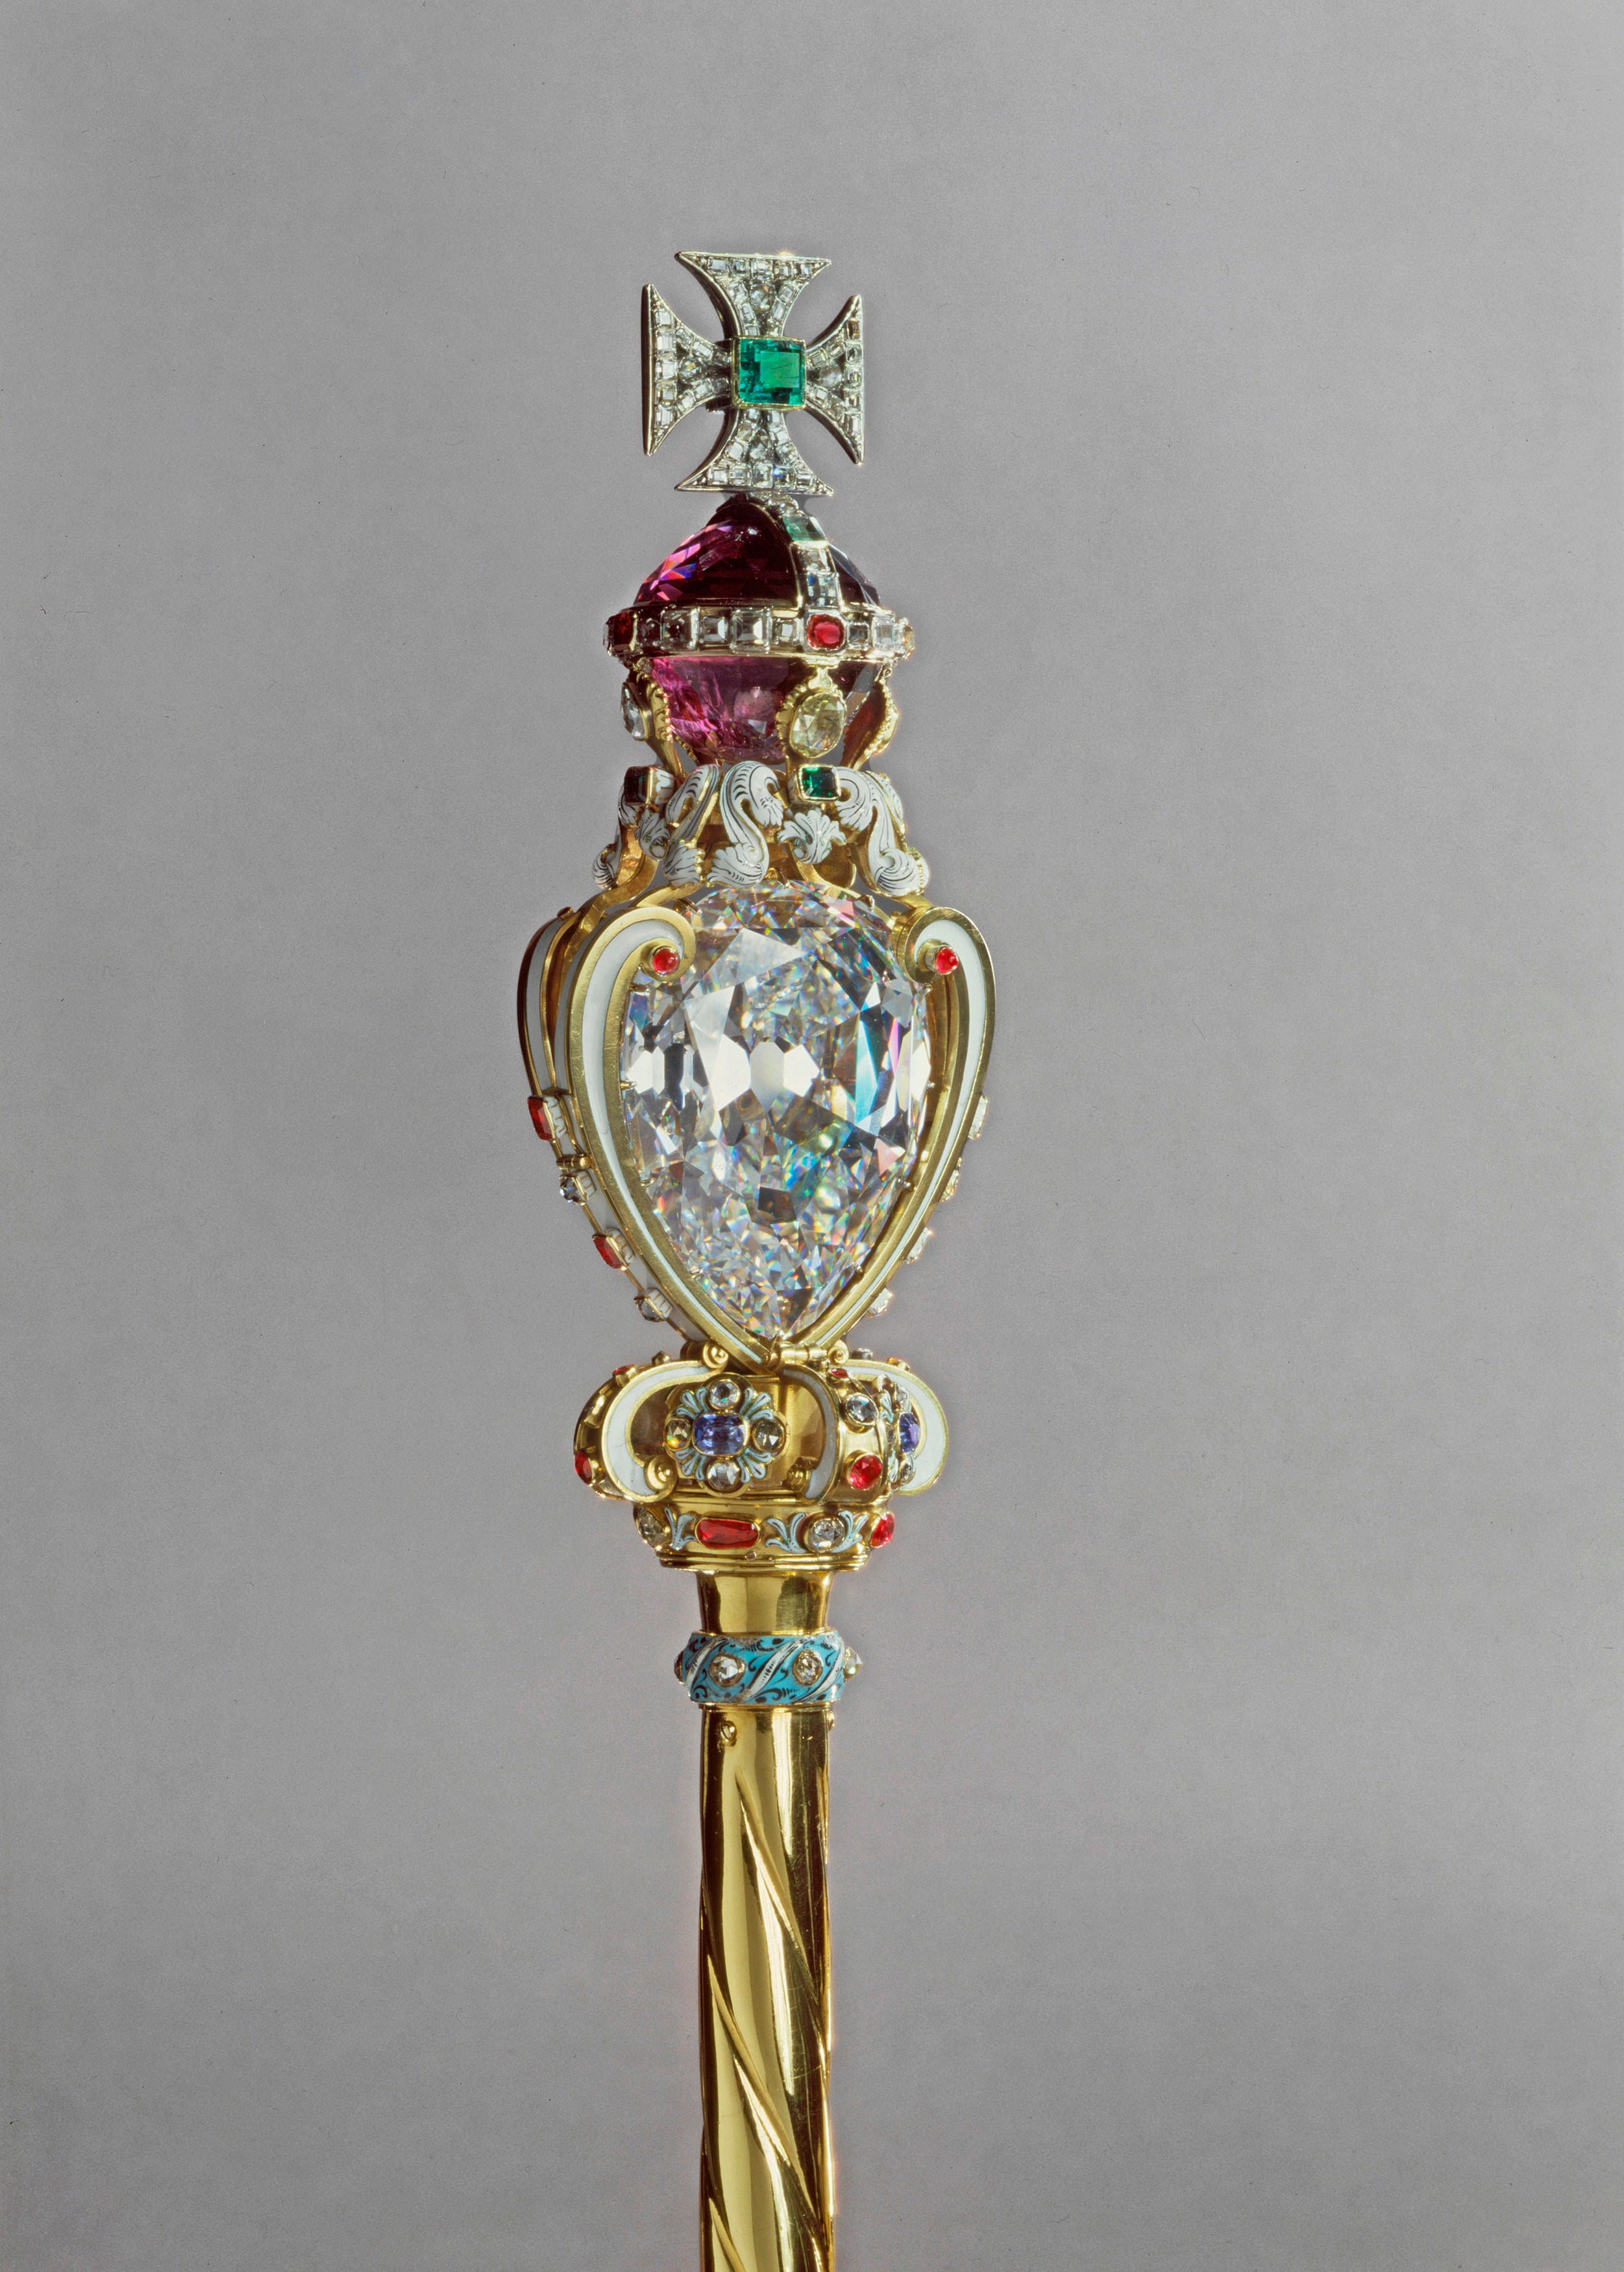 Handout photo issued by Buckingham Palace of the Sovereign’蝉 Sceptre with Cross which will feature during the Coronation of King Charles III at Westminster Abbey